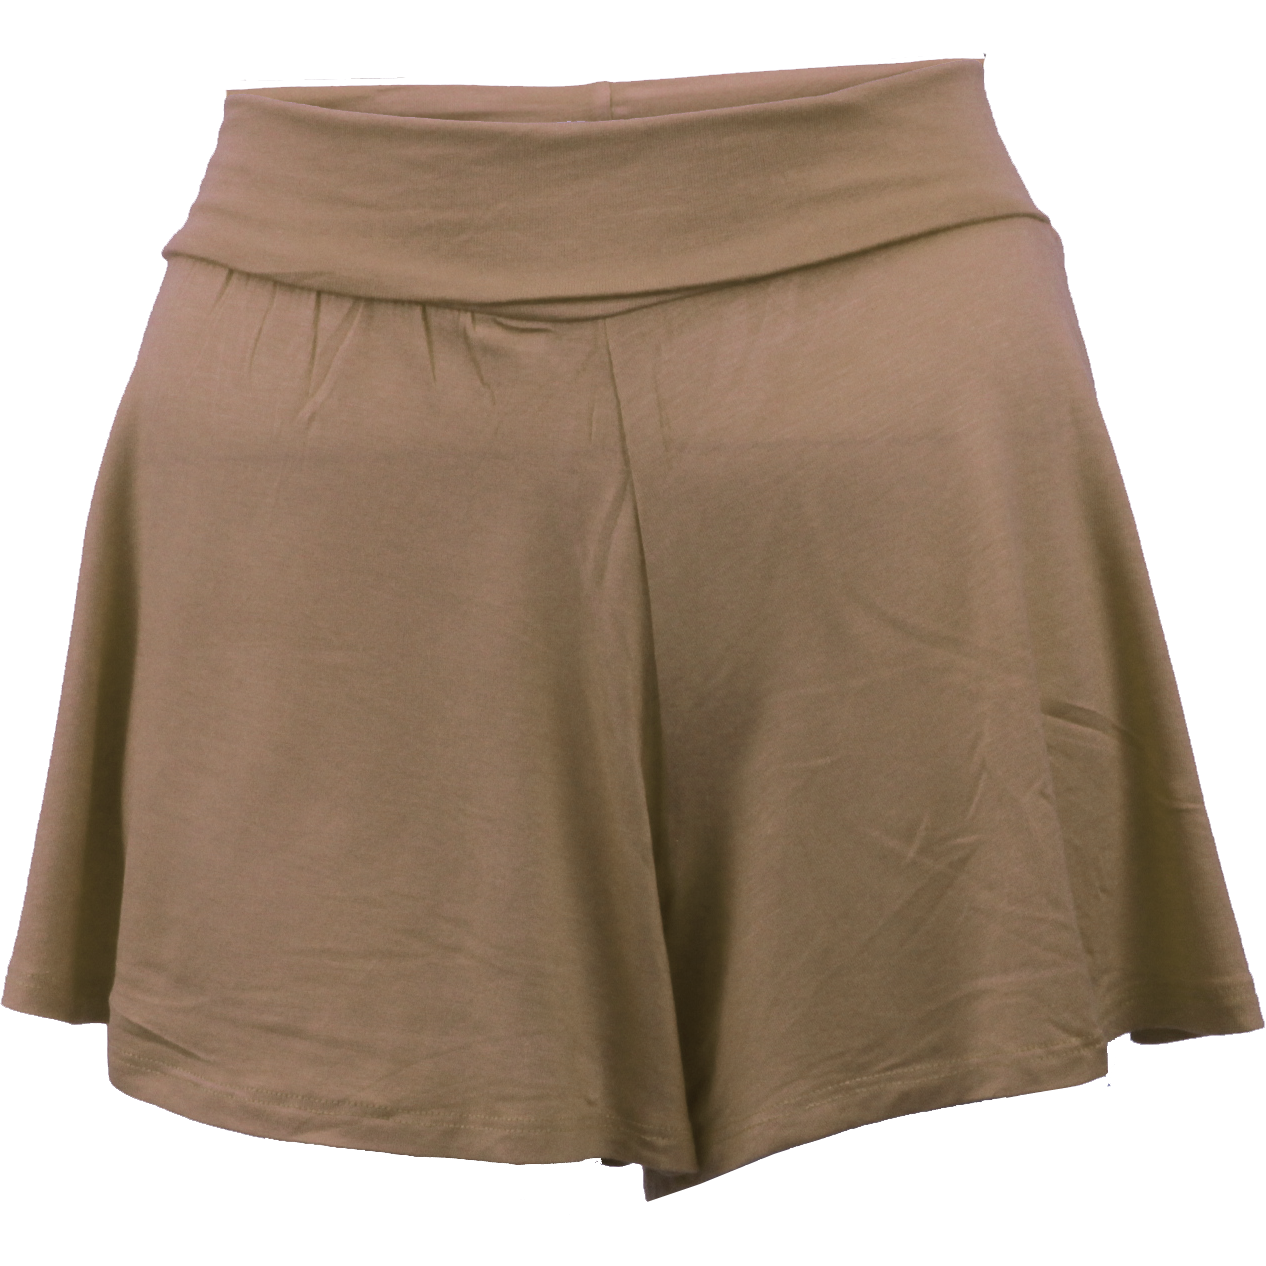 3" inseam wide bottom culotte with elastic waist band.Very soft rayon spandex fabric.Made in USA